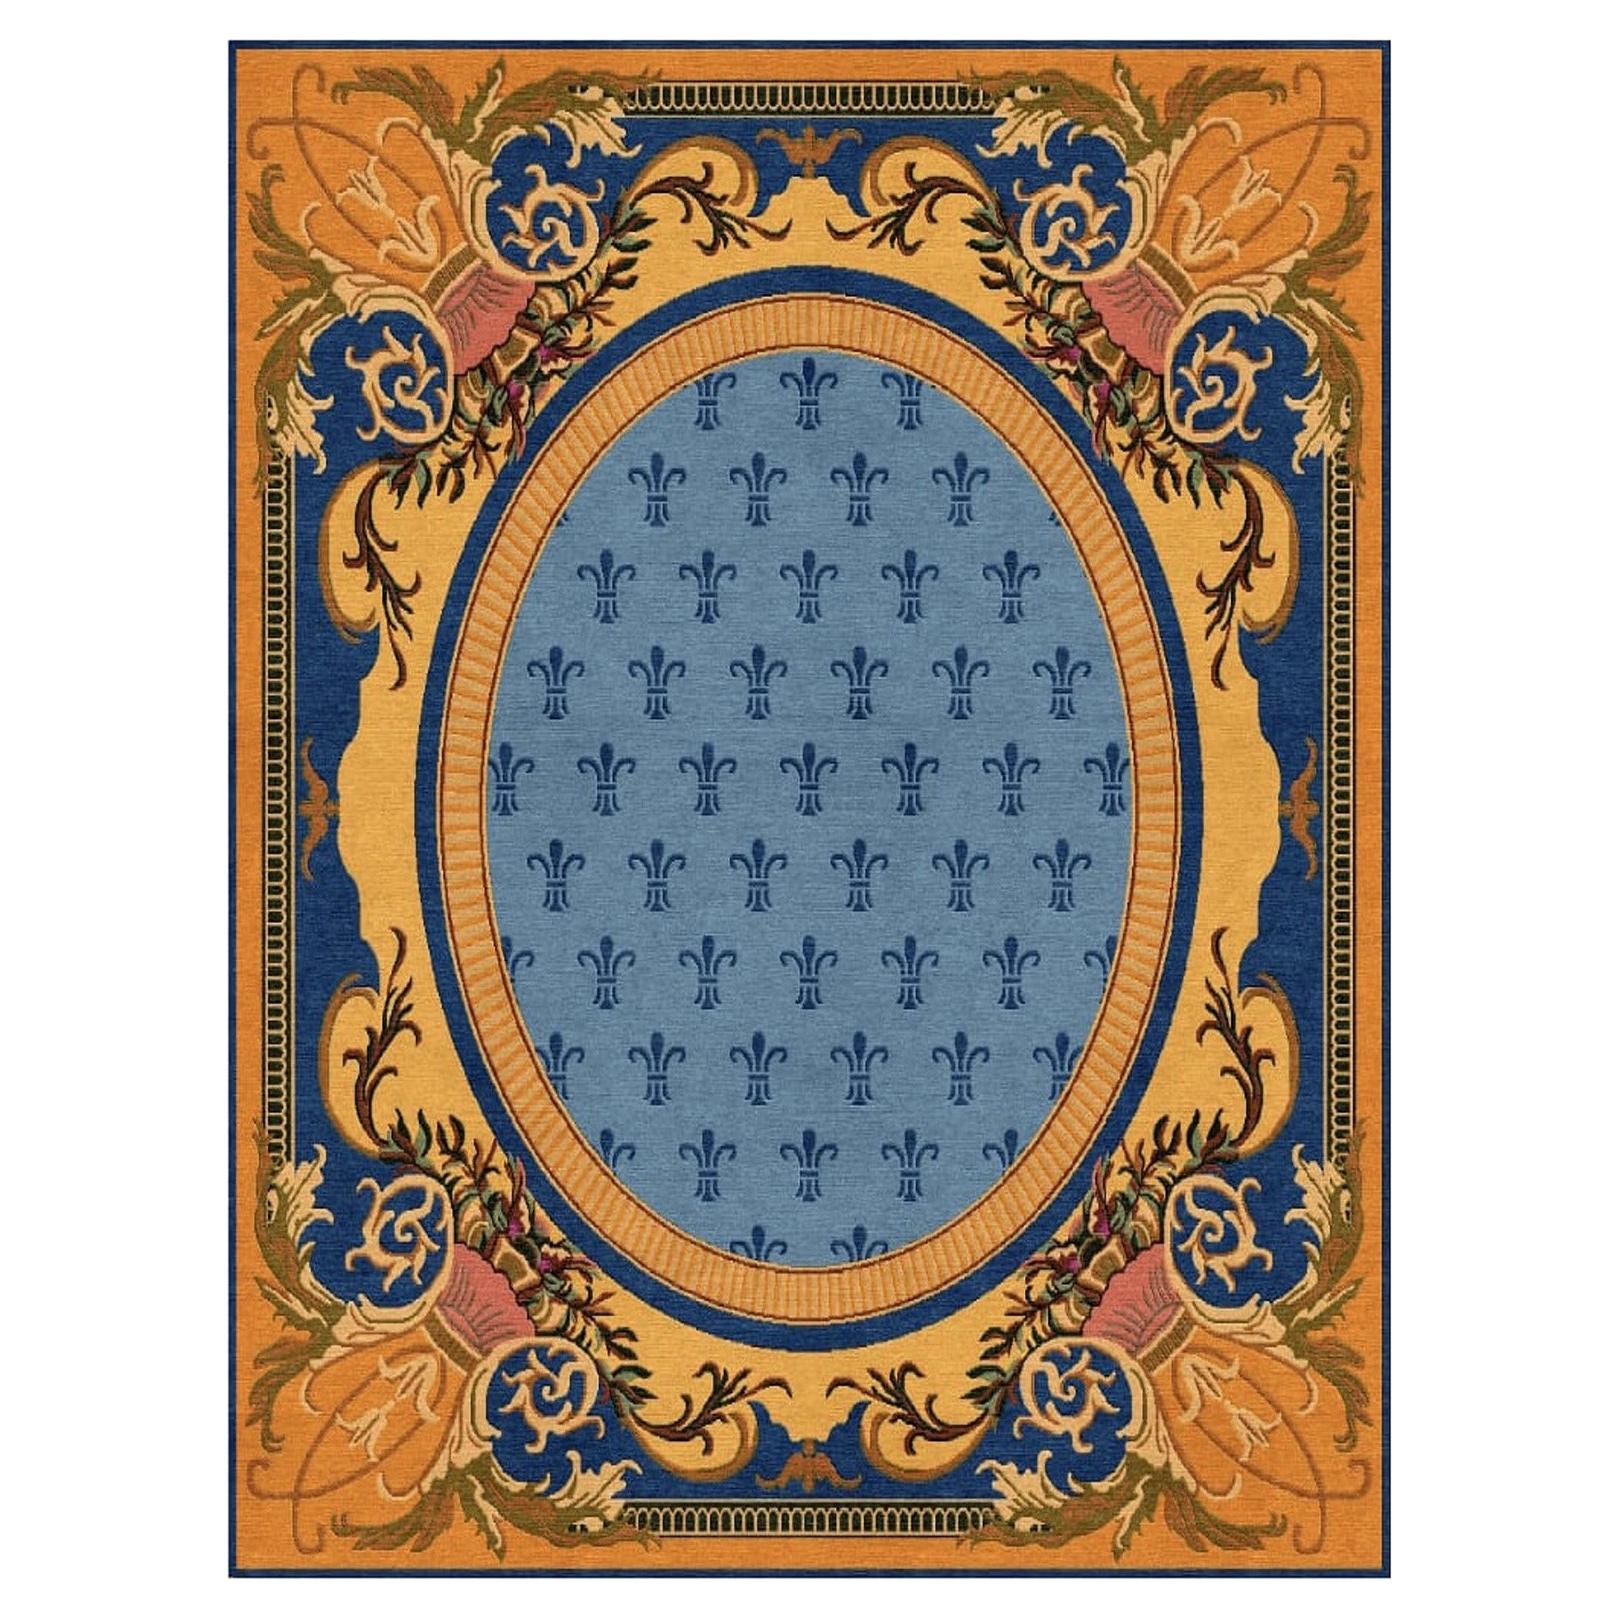 Bespoke Hand Knotted Rug is Style of Neoclassical Spanish Design